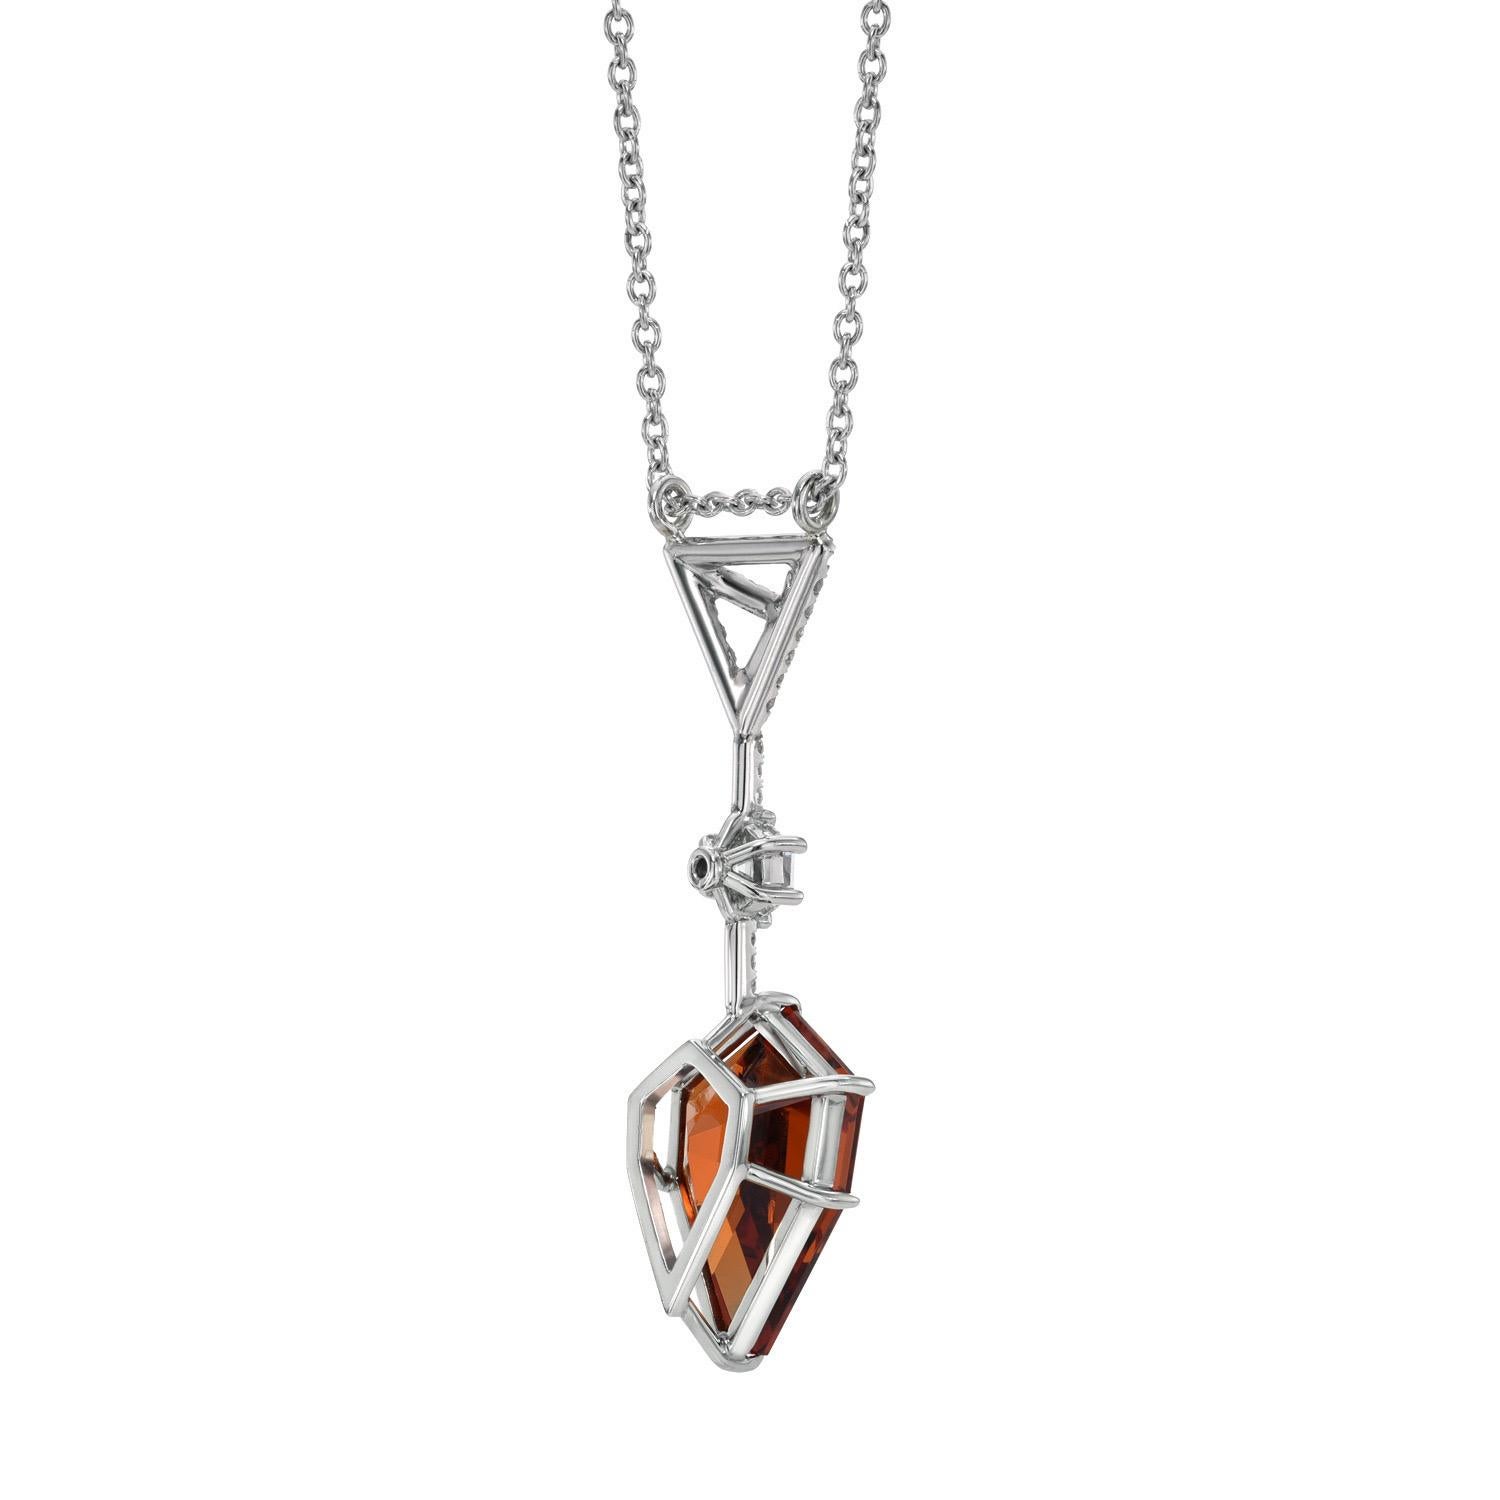 Remarkable 7.39 carat fancy Shield Spessartite Garnet, suspending from a 0.27 carat E/VS1 diamond hexagon, and a three dimensional, signature Merkaba triangle, set with a total of 0.22 carats of single-cut collection diamonds. This exclusive